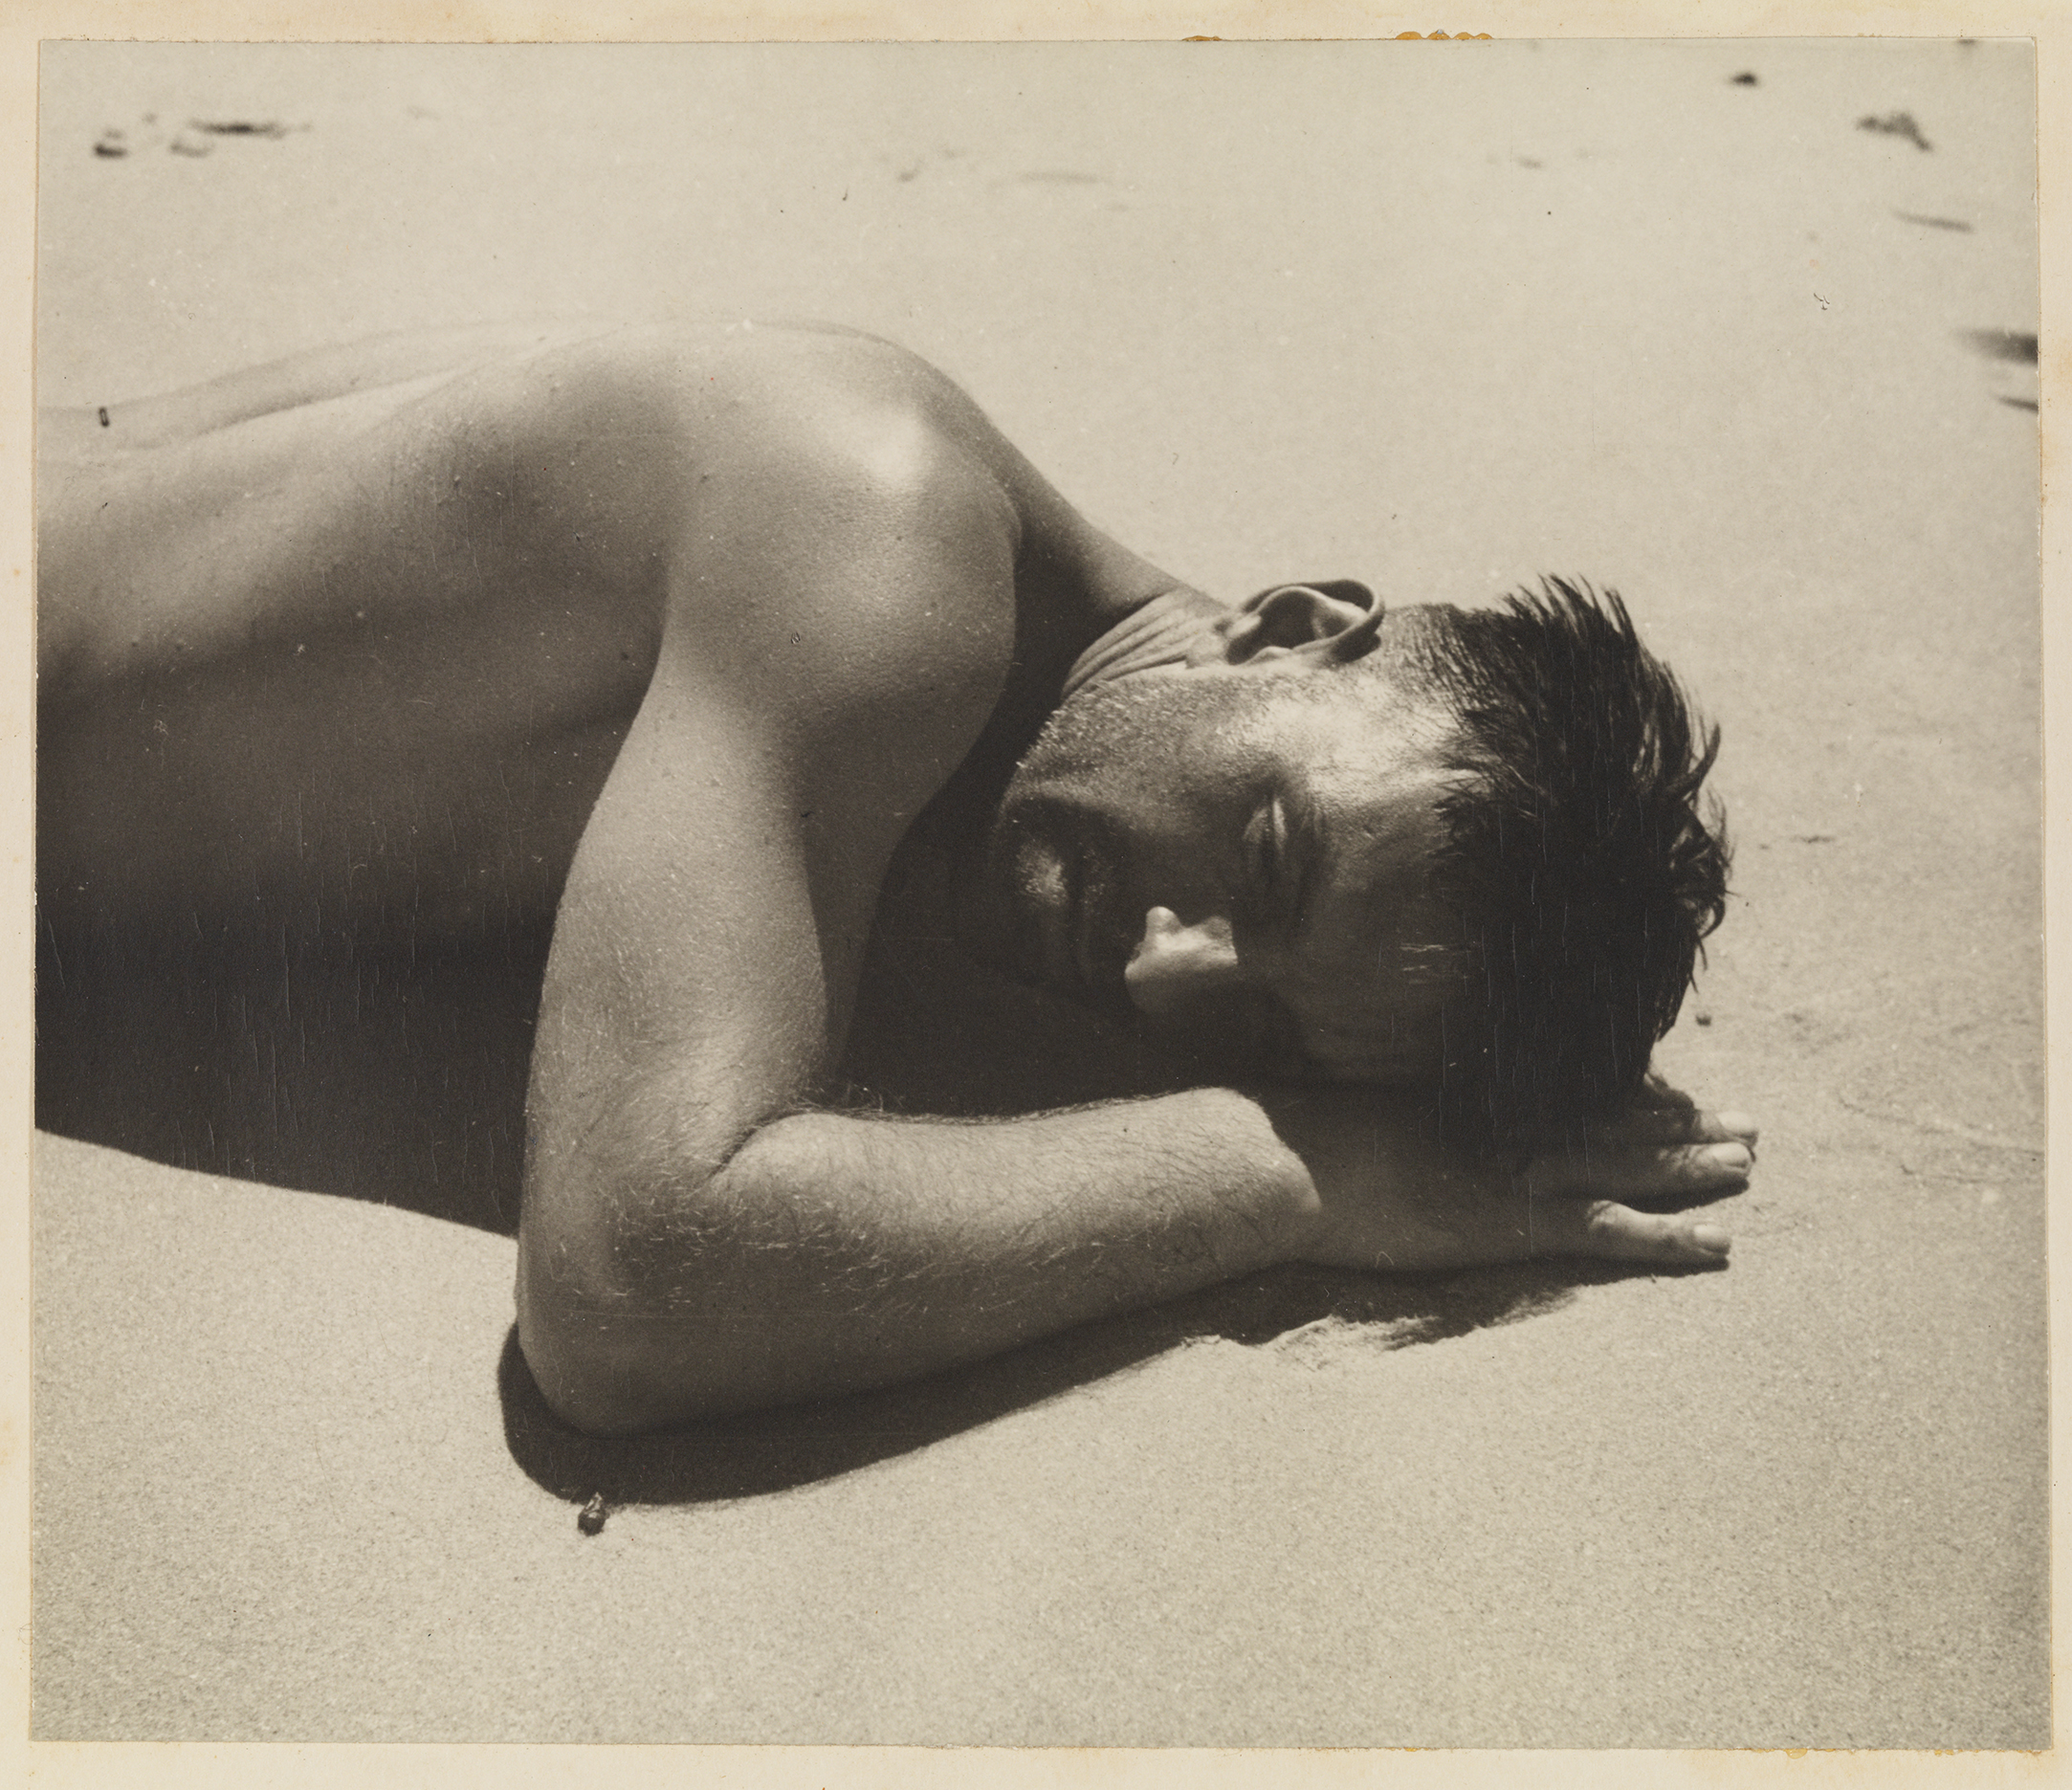 A sepia photograph of a man lying on a beach, covered in droplets of water